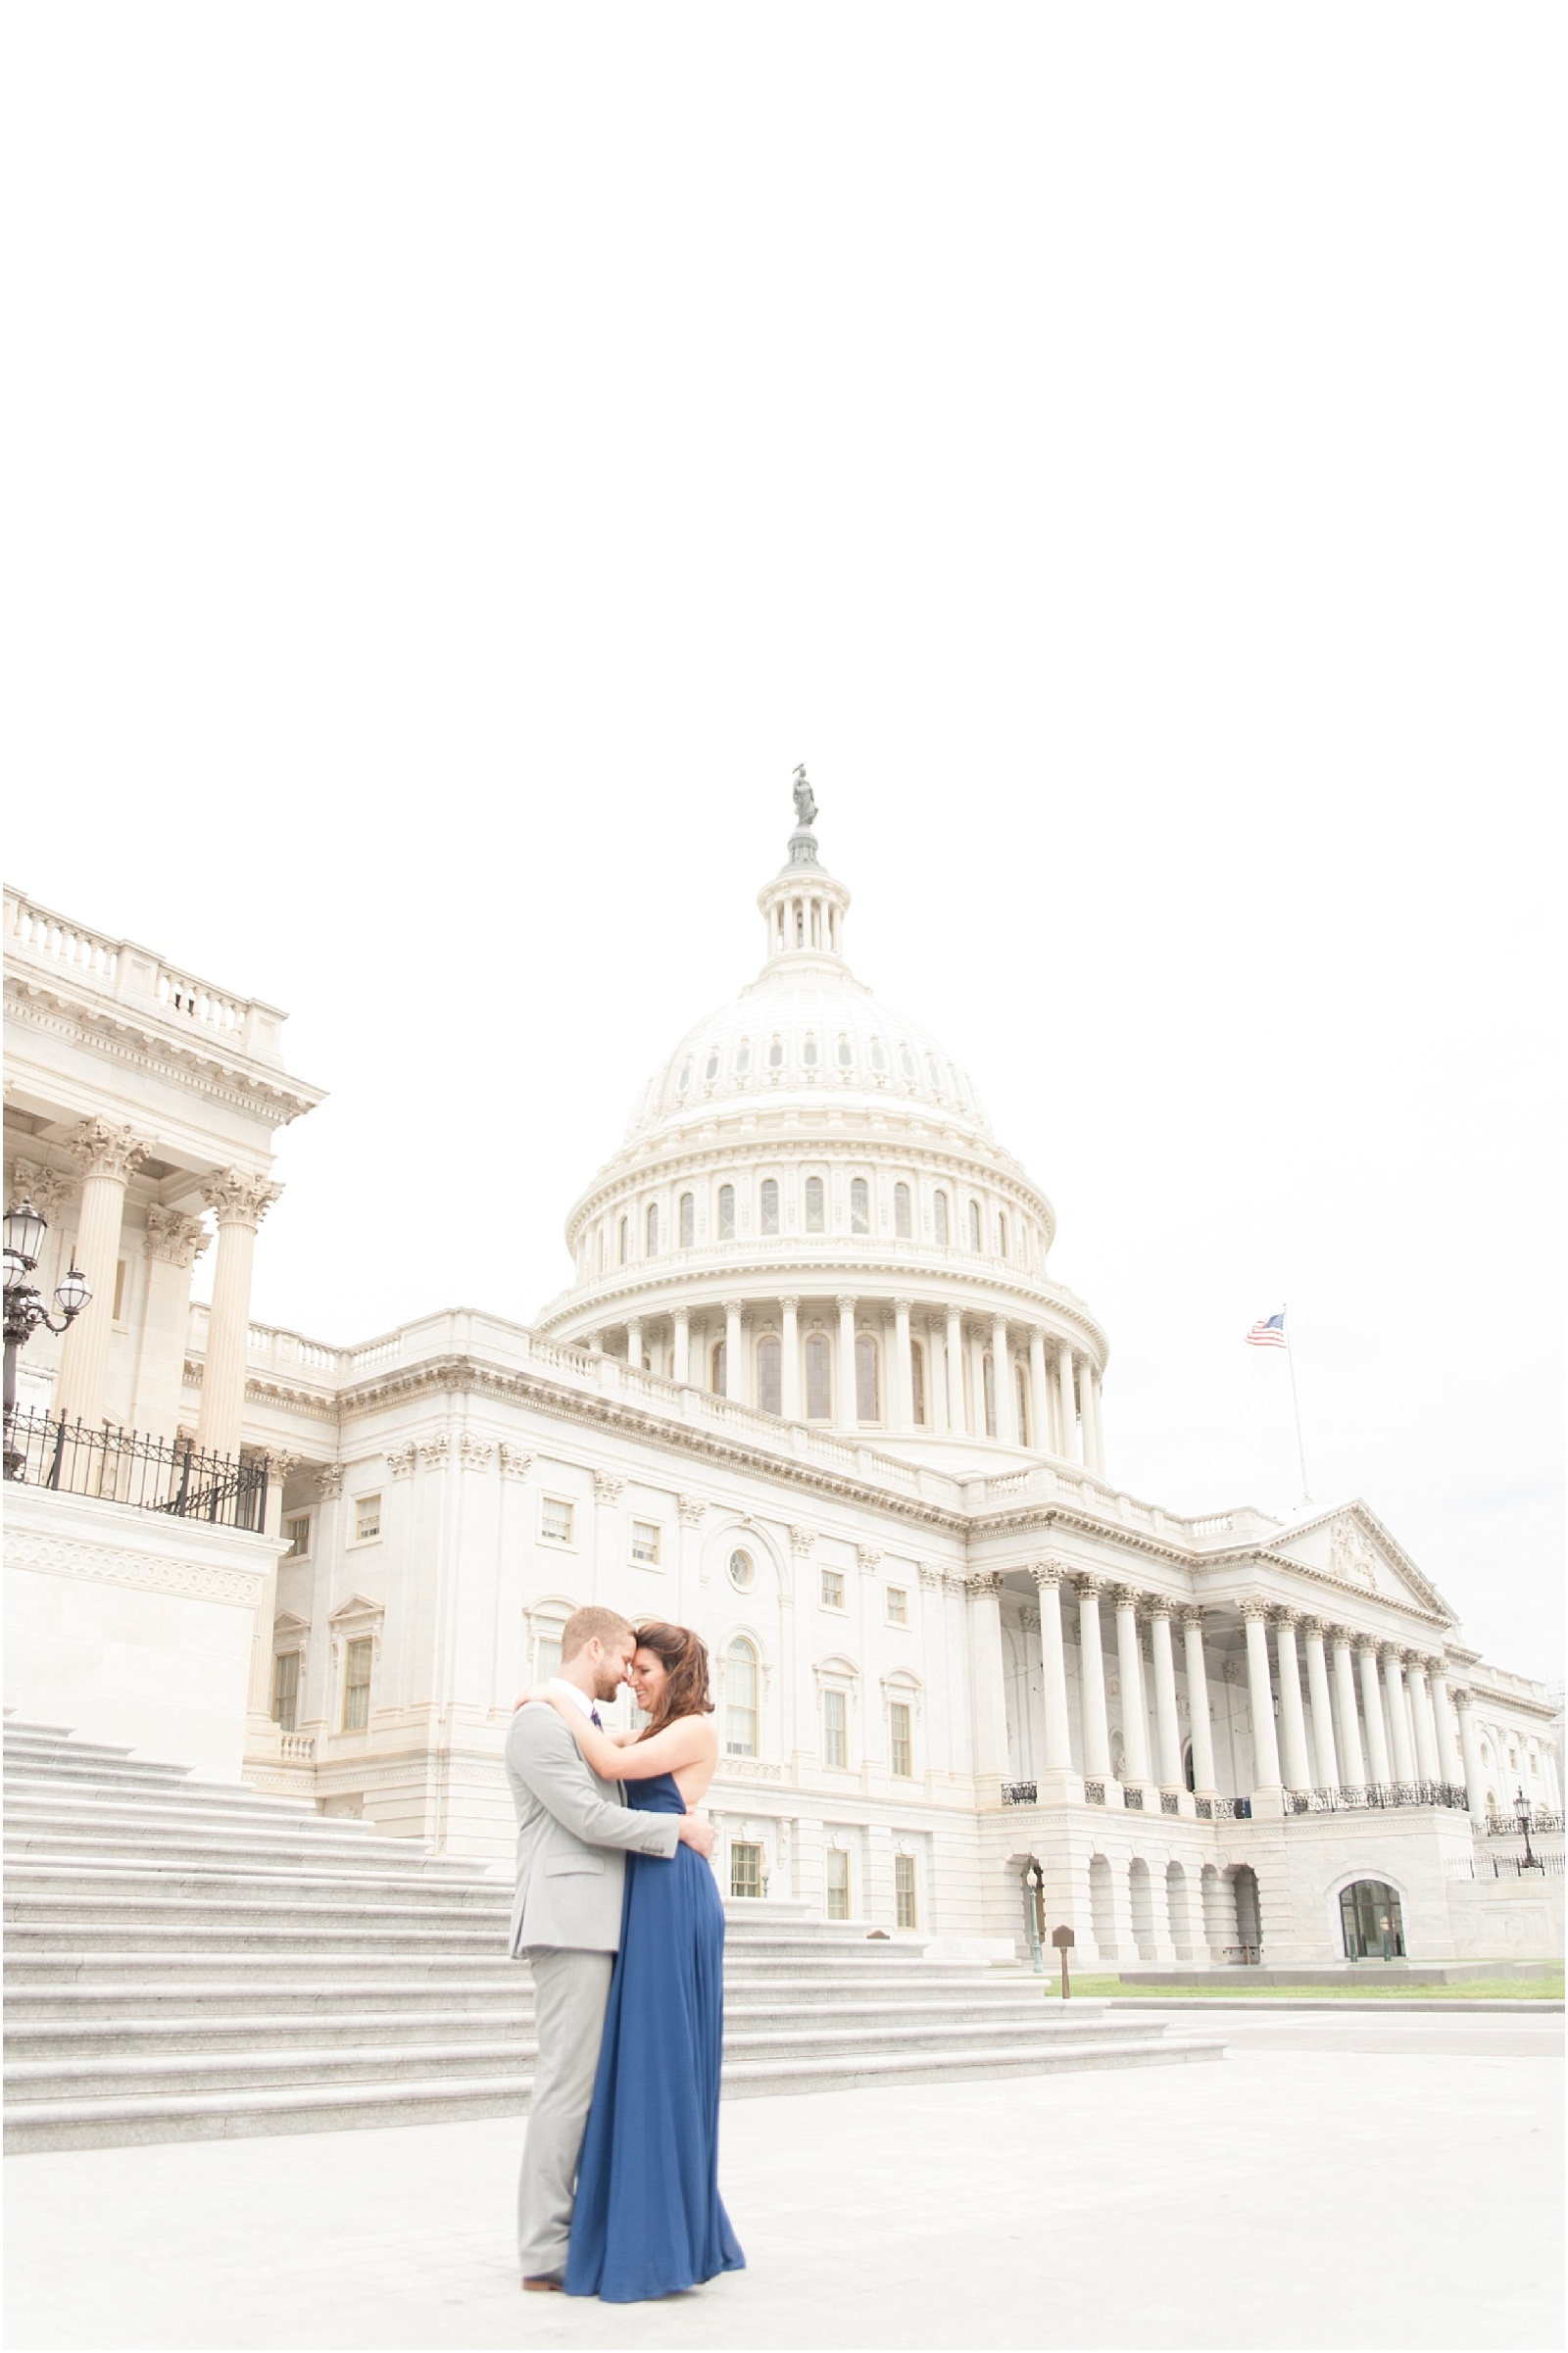 0032 Bret and Brandie Photography| Washington DC Engagement | Megan and Connor.jpg